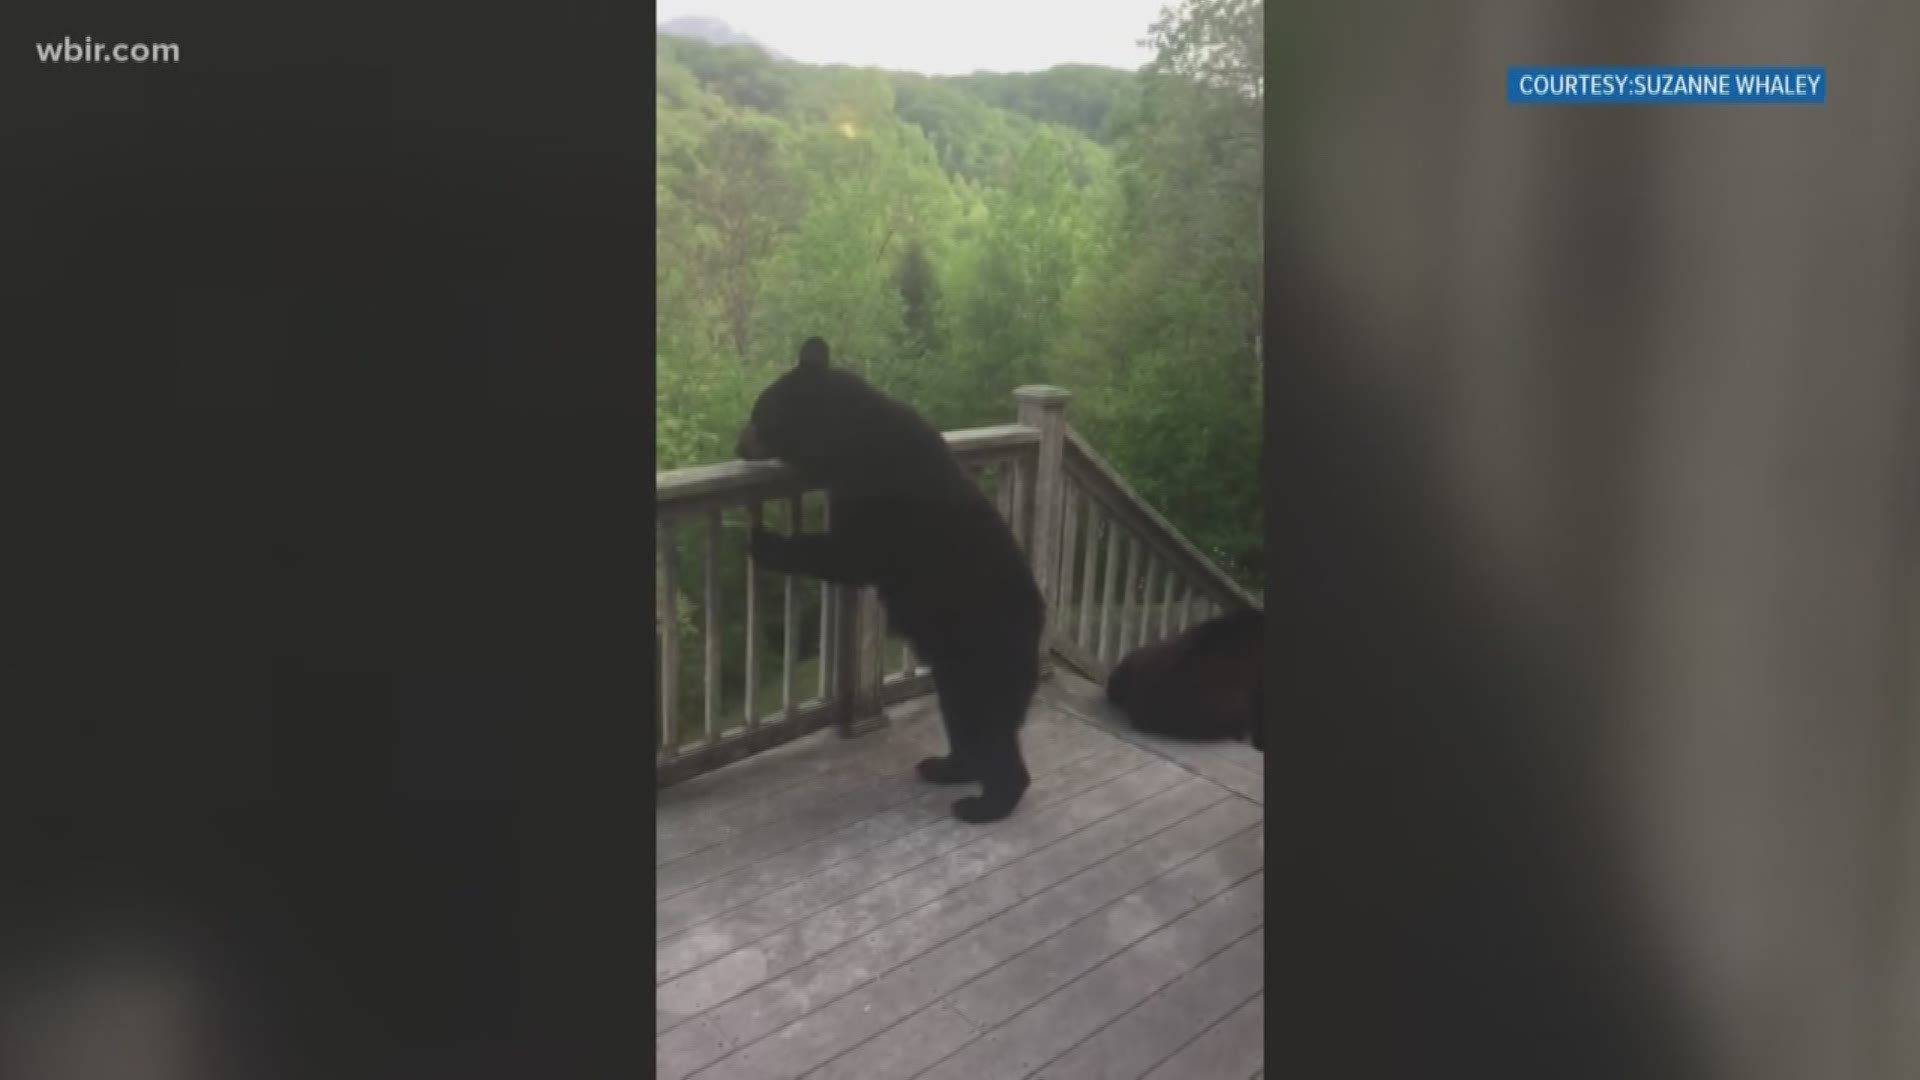 Bears are starting to pop up near homes as the weather gets warmer. Suzanne Whaley shared the video from her porch in Gatlinburg yesterday.
	TWRA says it's normal for bears to start popping up in people's yards this time of the year.